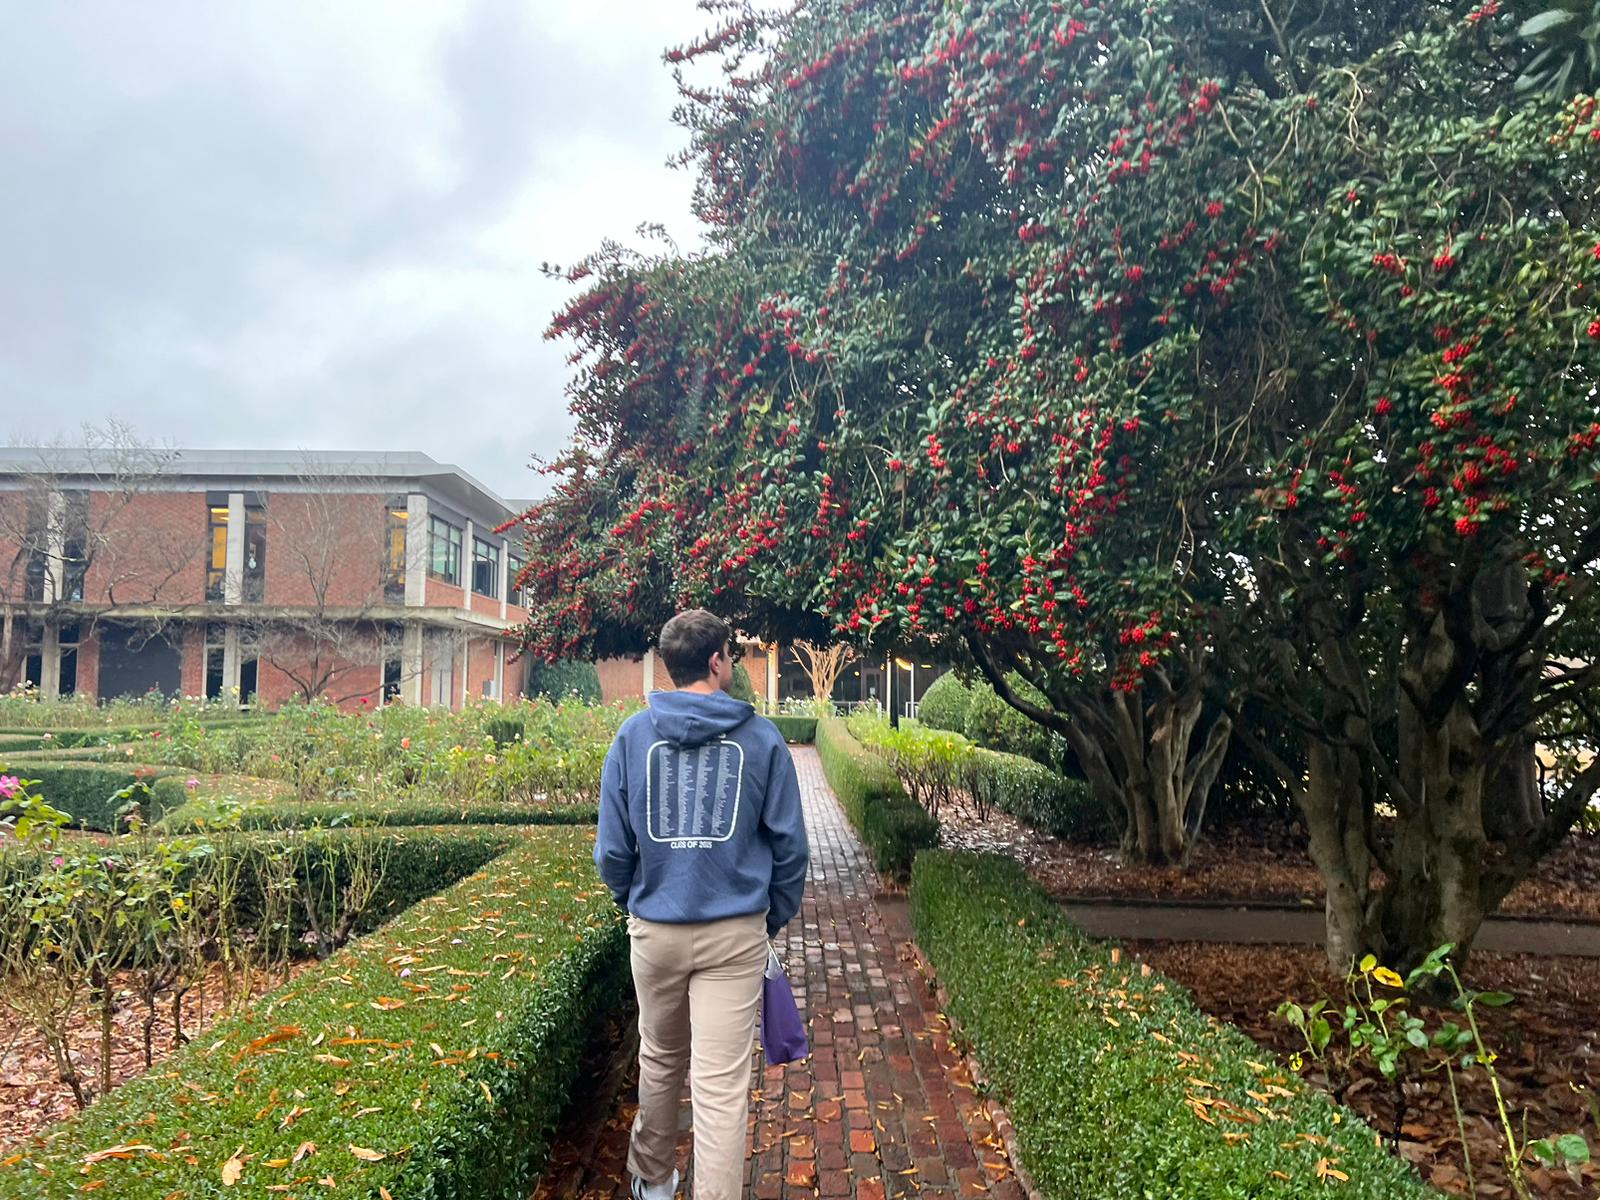 Junior Tommy Thornton explores the gardens in Furman University. According to him, Thornton was interested in seeing what campus life was all about. I liked campus environment a lot, he said.